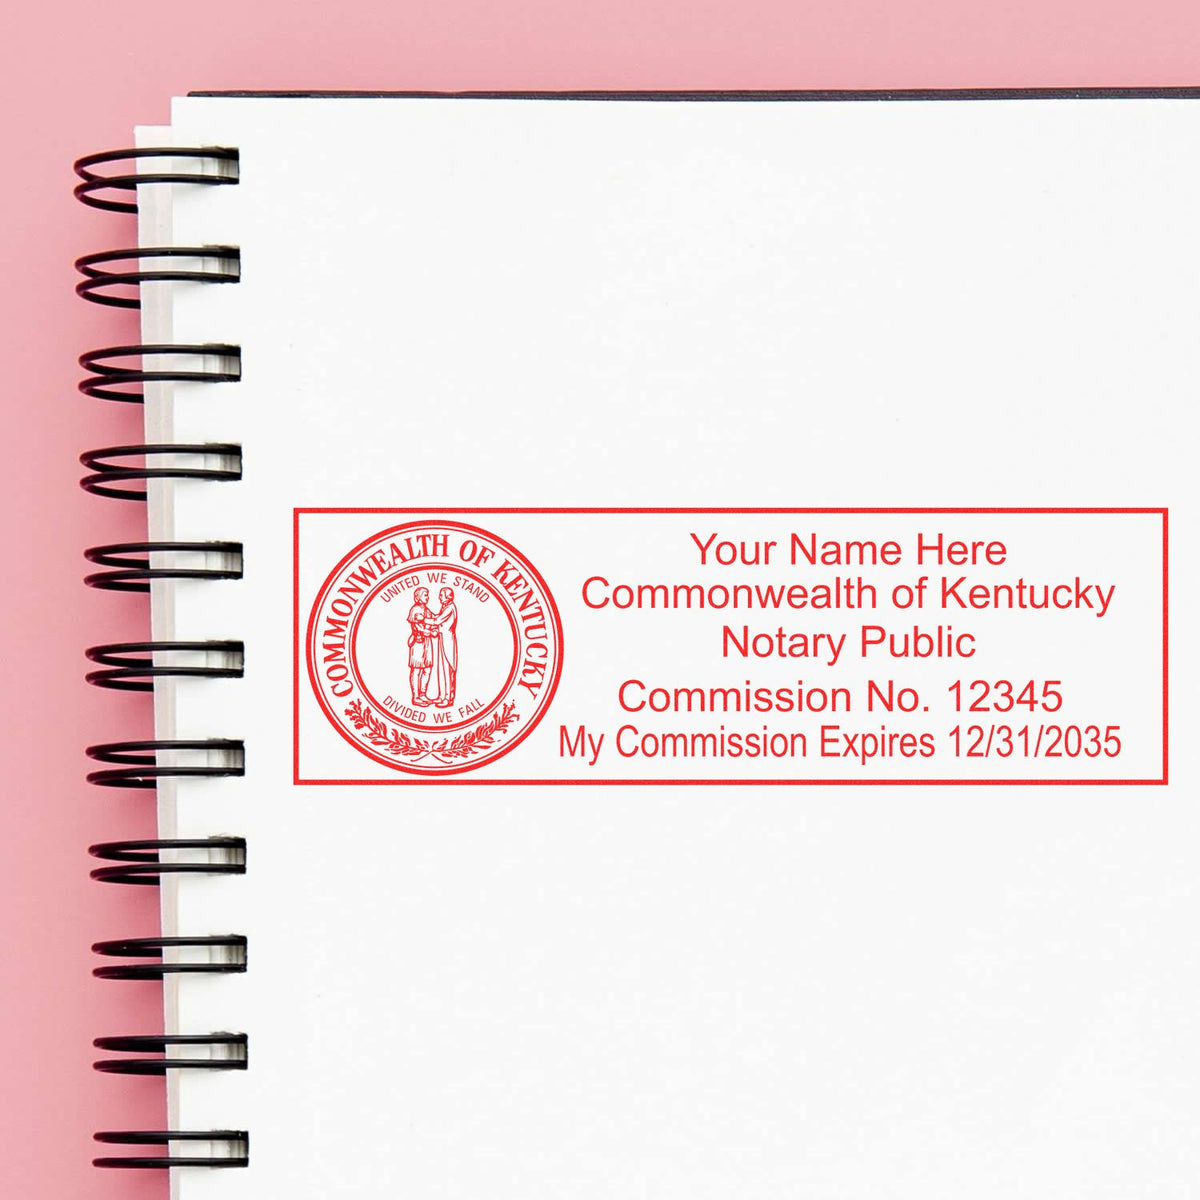 A stamped impression of the PSI Kentucky Notary Stamp in this stylish lifestyle photo, setting the tone for a unique and personalized product.